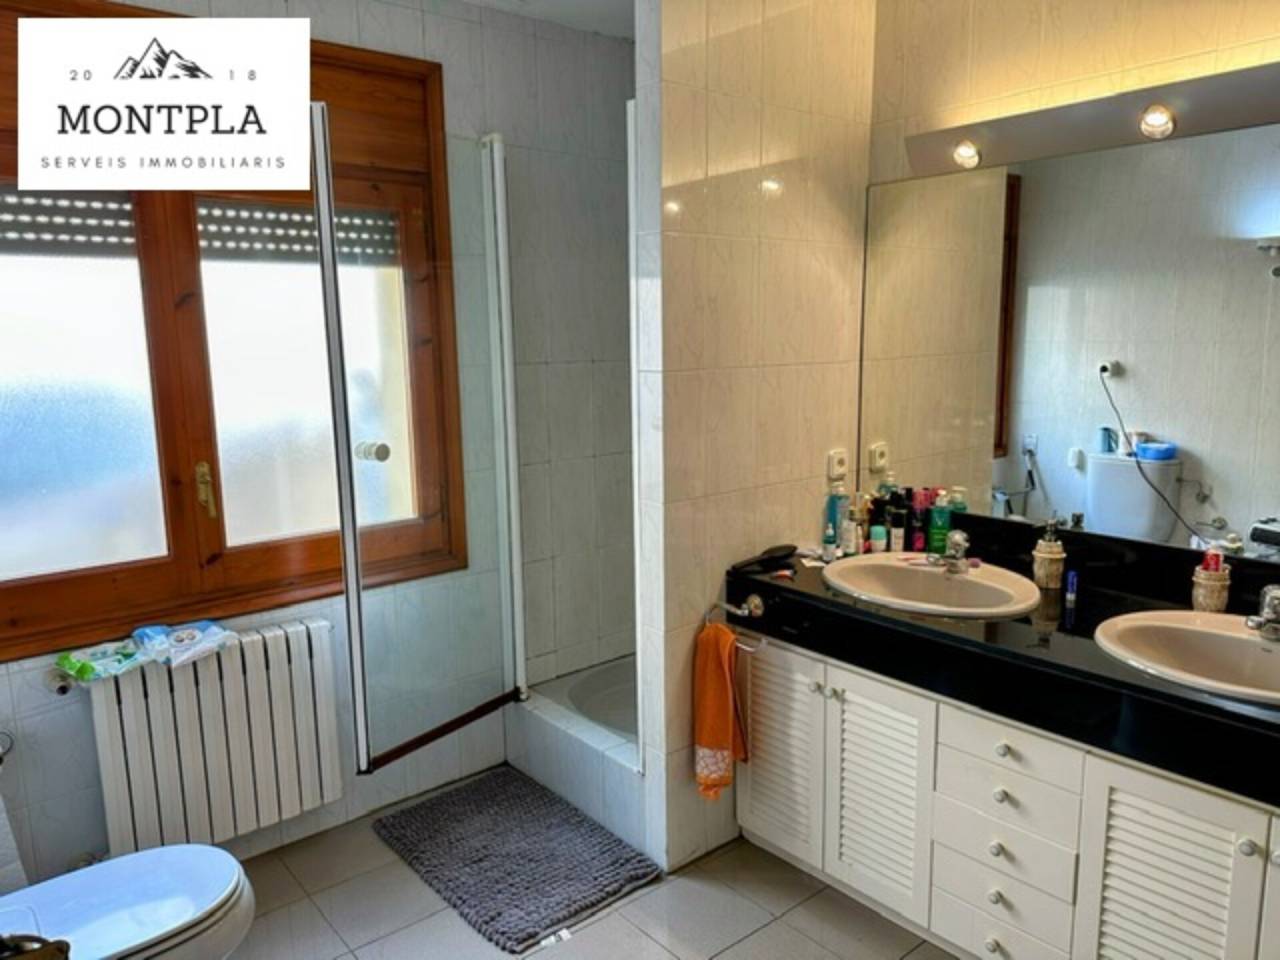 Penthouse apartment for sale in Santa Coloma